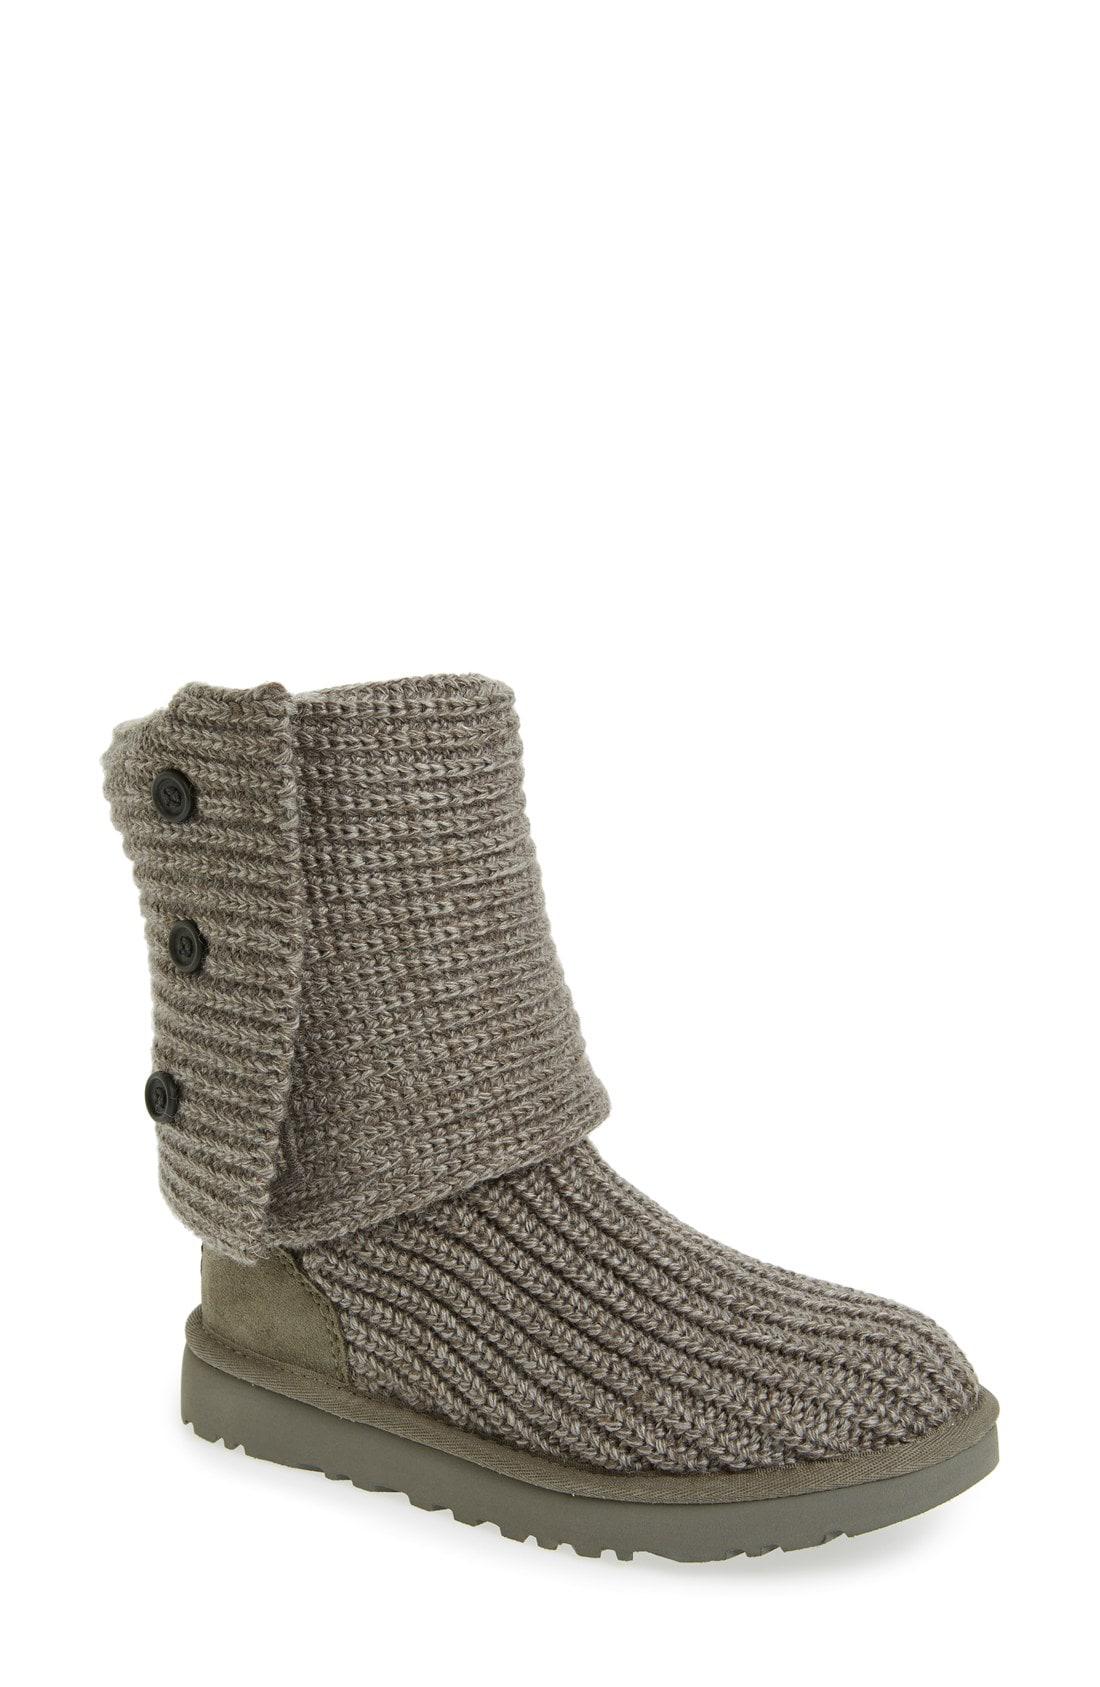 Lyst - Ugg Ugg Classic Cardy Ii Knit Boot in Gray